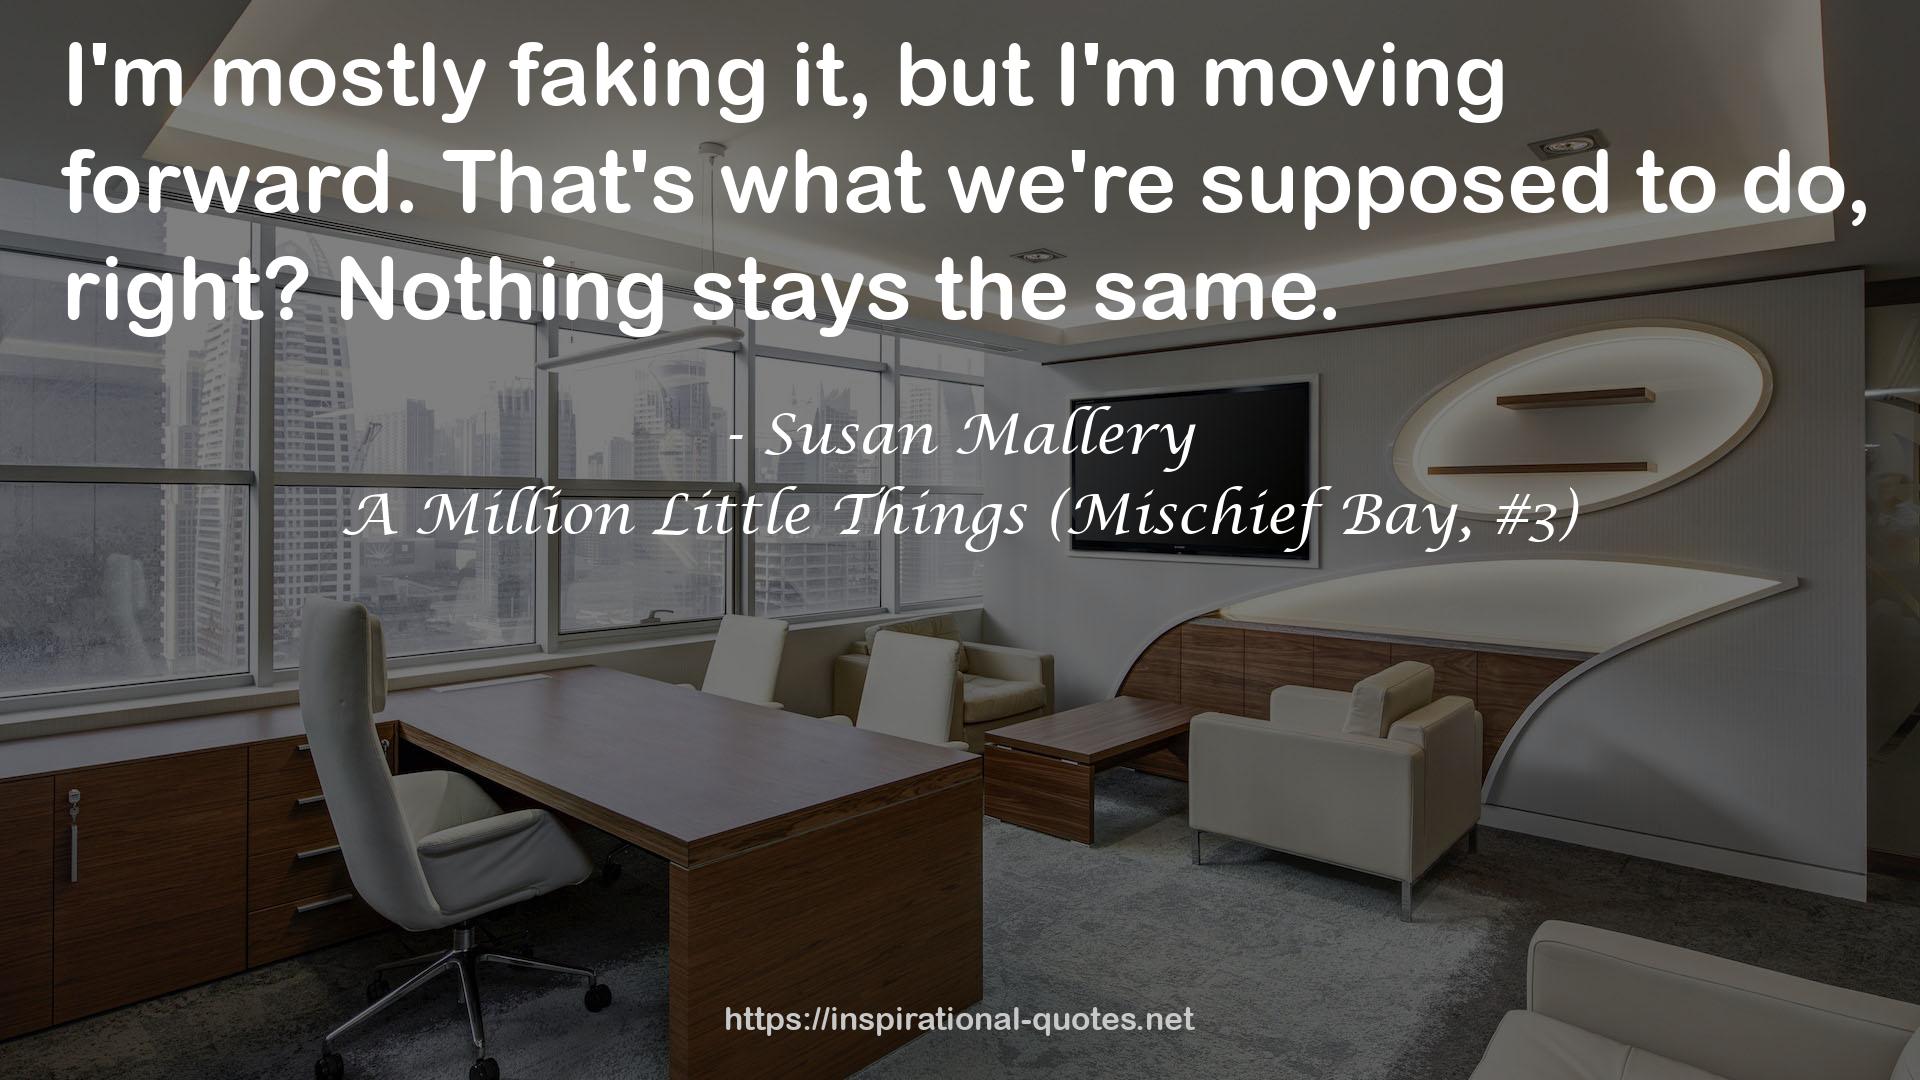 A Million Little Things (Mischief Bay, #3) QUOTES